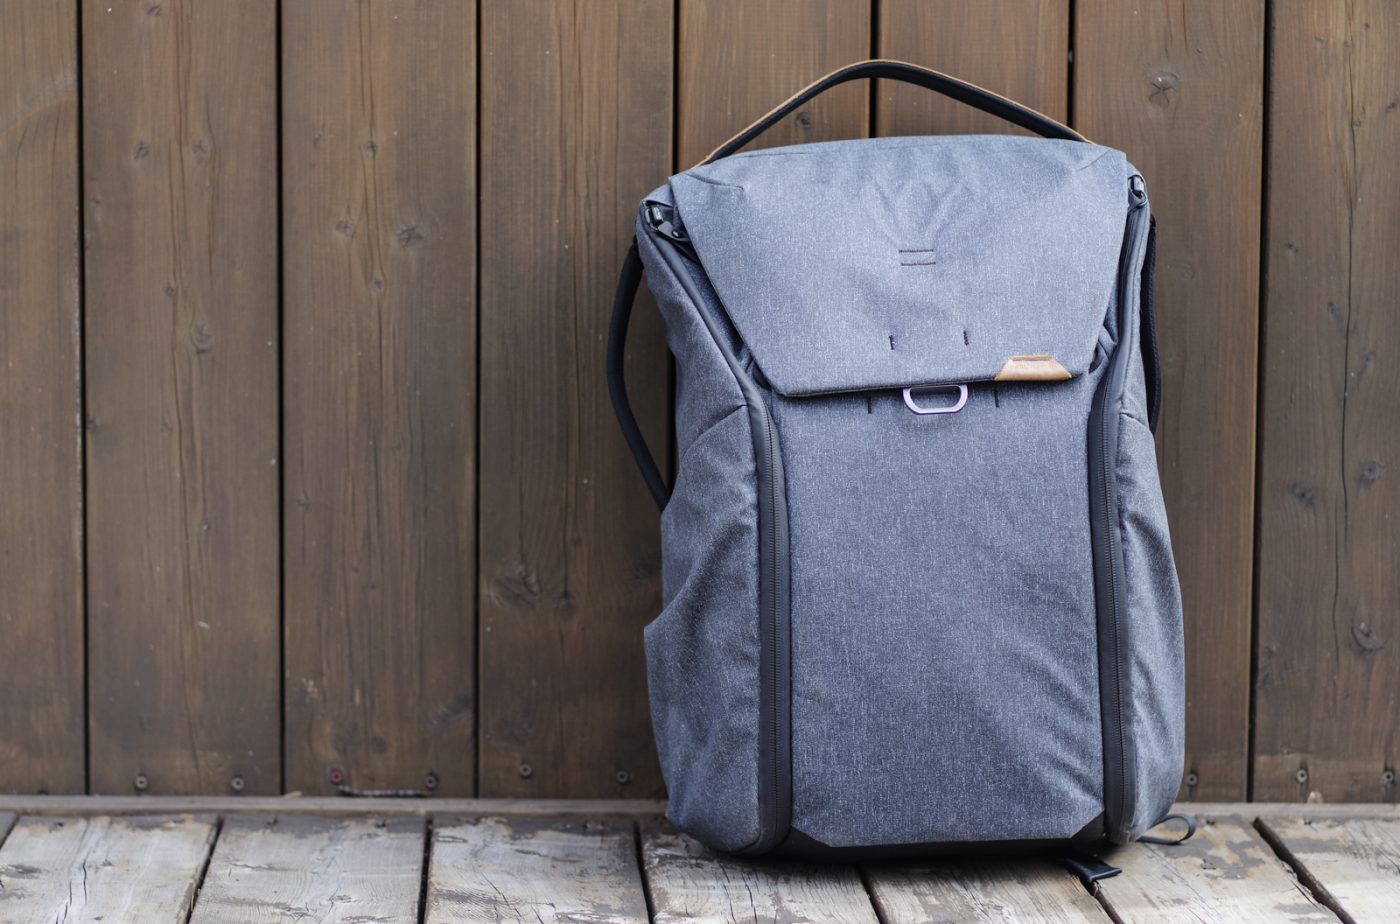 Peak Design Everyday Backpack Review: Digital Photography Review